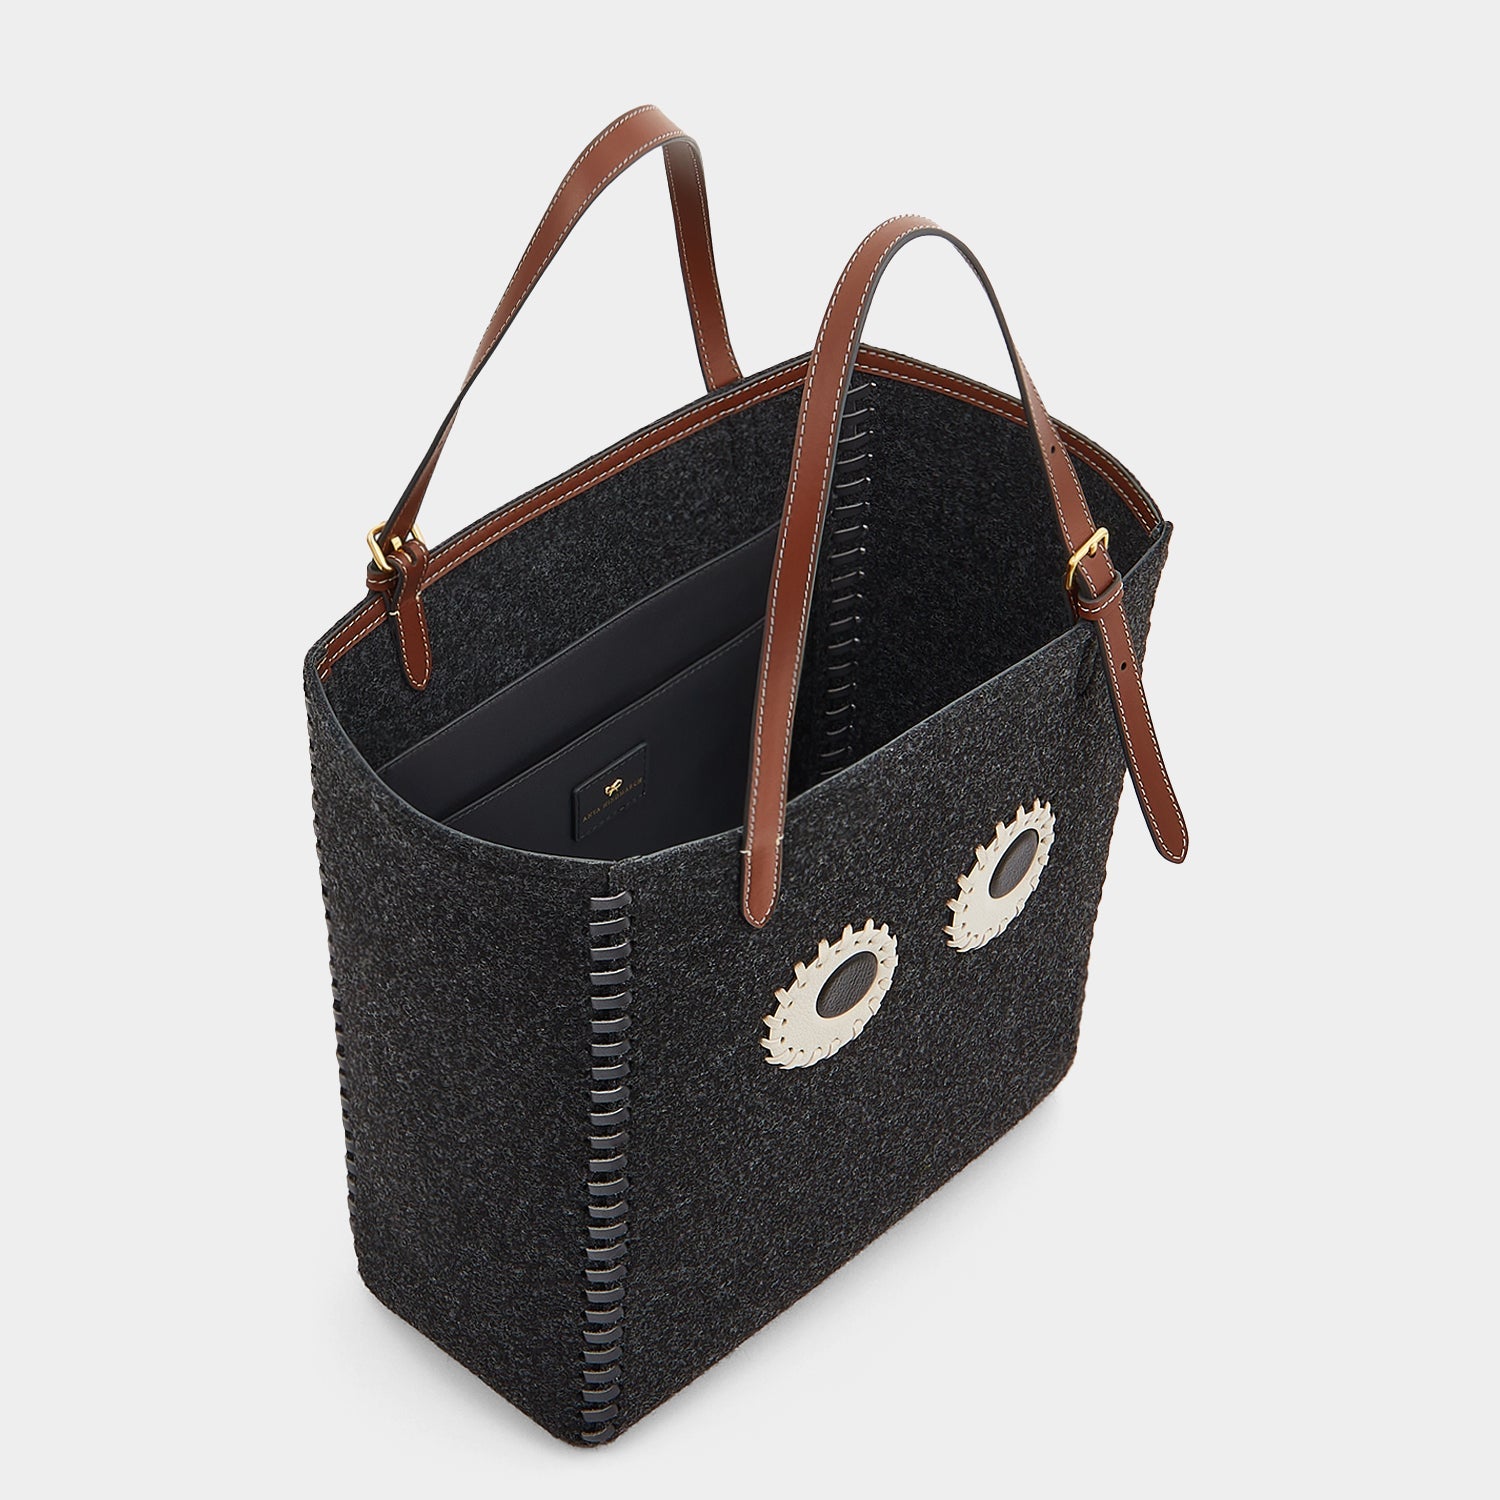 N/S Eyes Small Tote -

                  
                    Felt in Charcoal -
                  

                  Anya Hindmarch US
